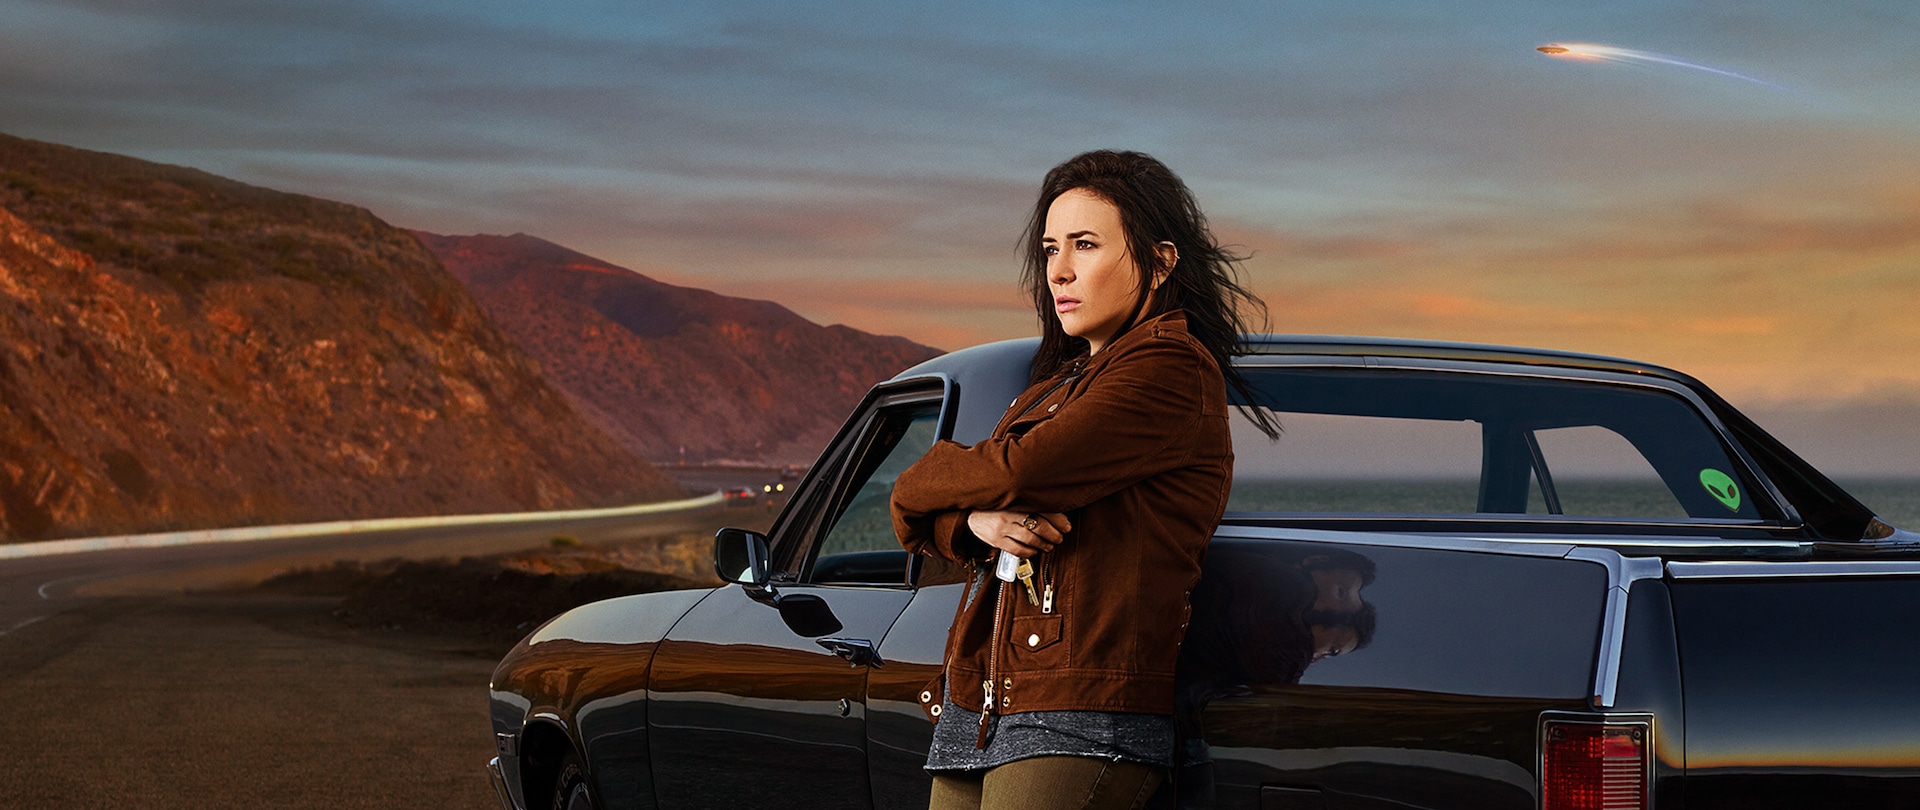 Sam from Better Things in brown jacket leaning against black impala with sunset and mountains in background